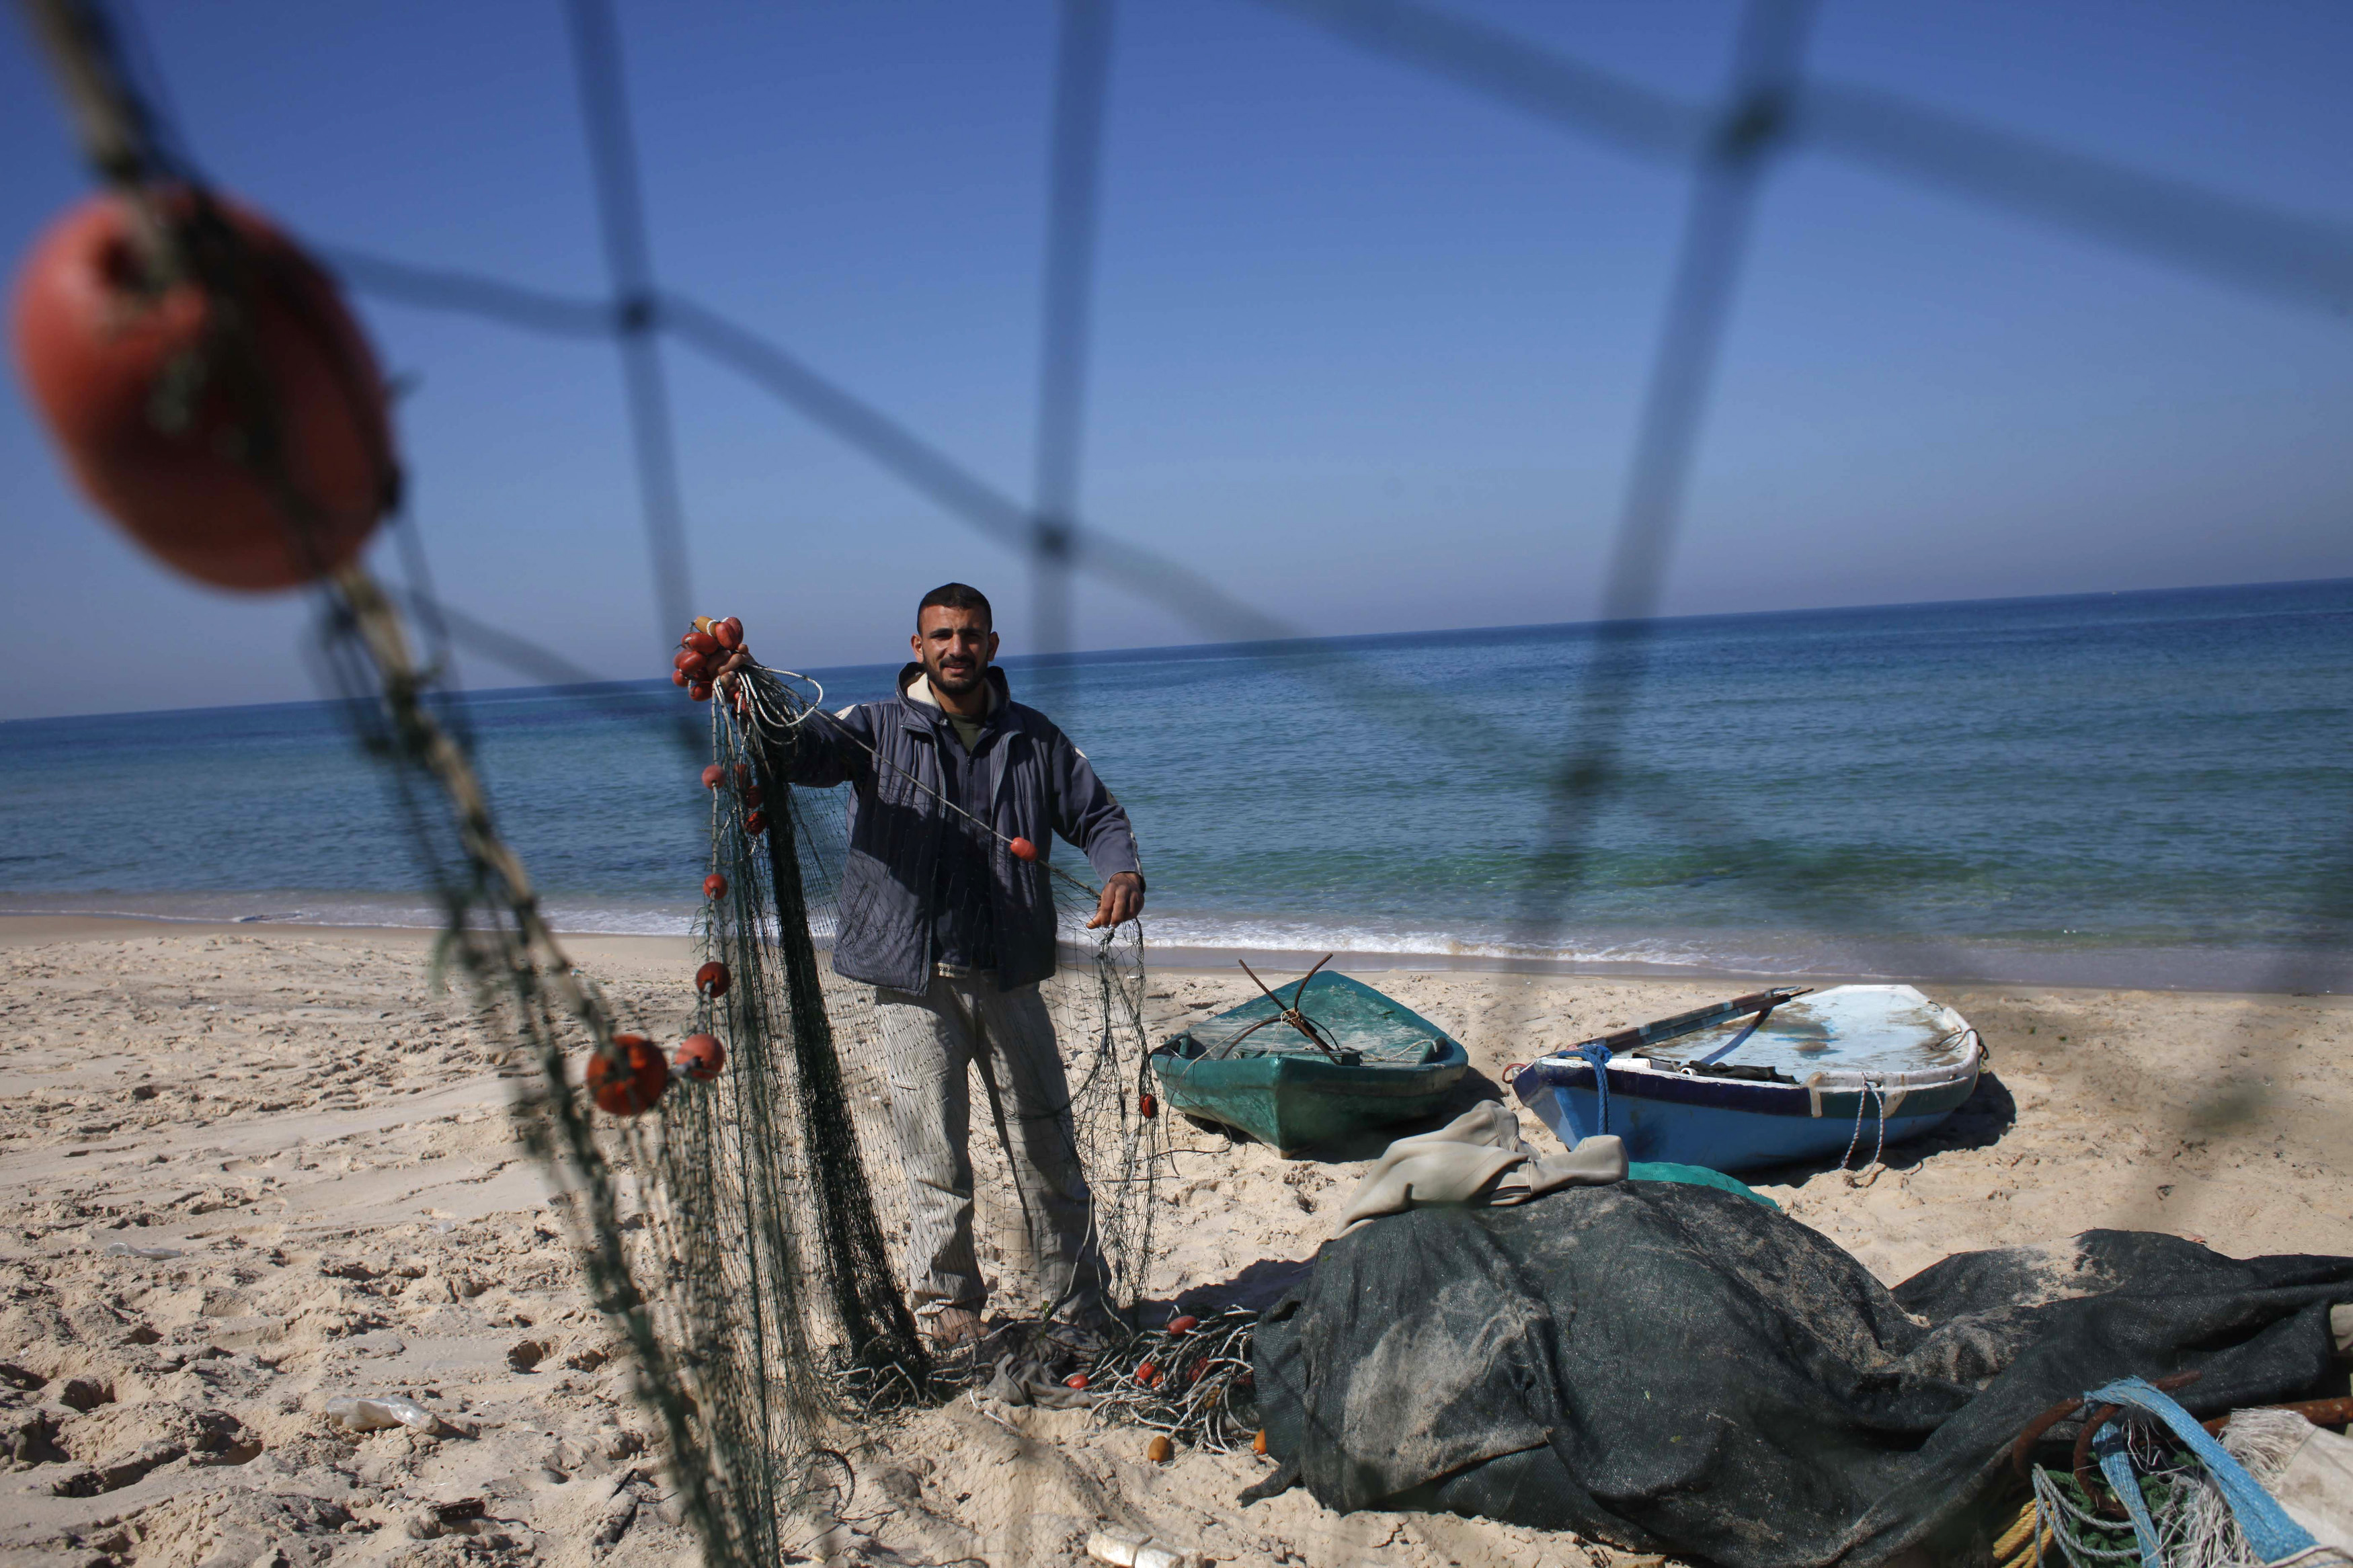 Palestinian fisherman Joudat Ghrab, who said he scooped a 500-kg bronze statue of the Greek God Apollo from the sea bed last August, prepares his fishing net in the central Gaza Strip